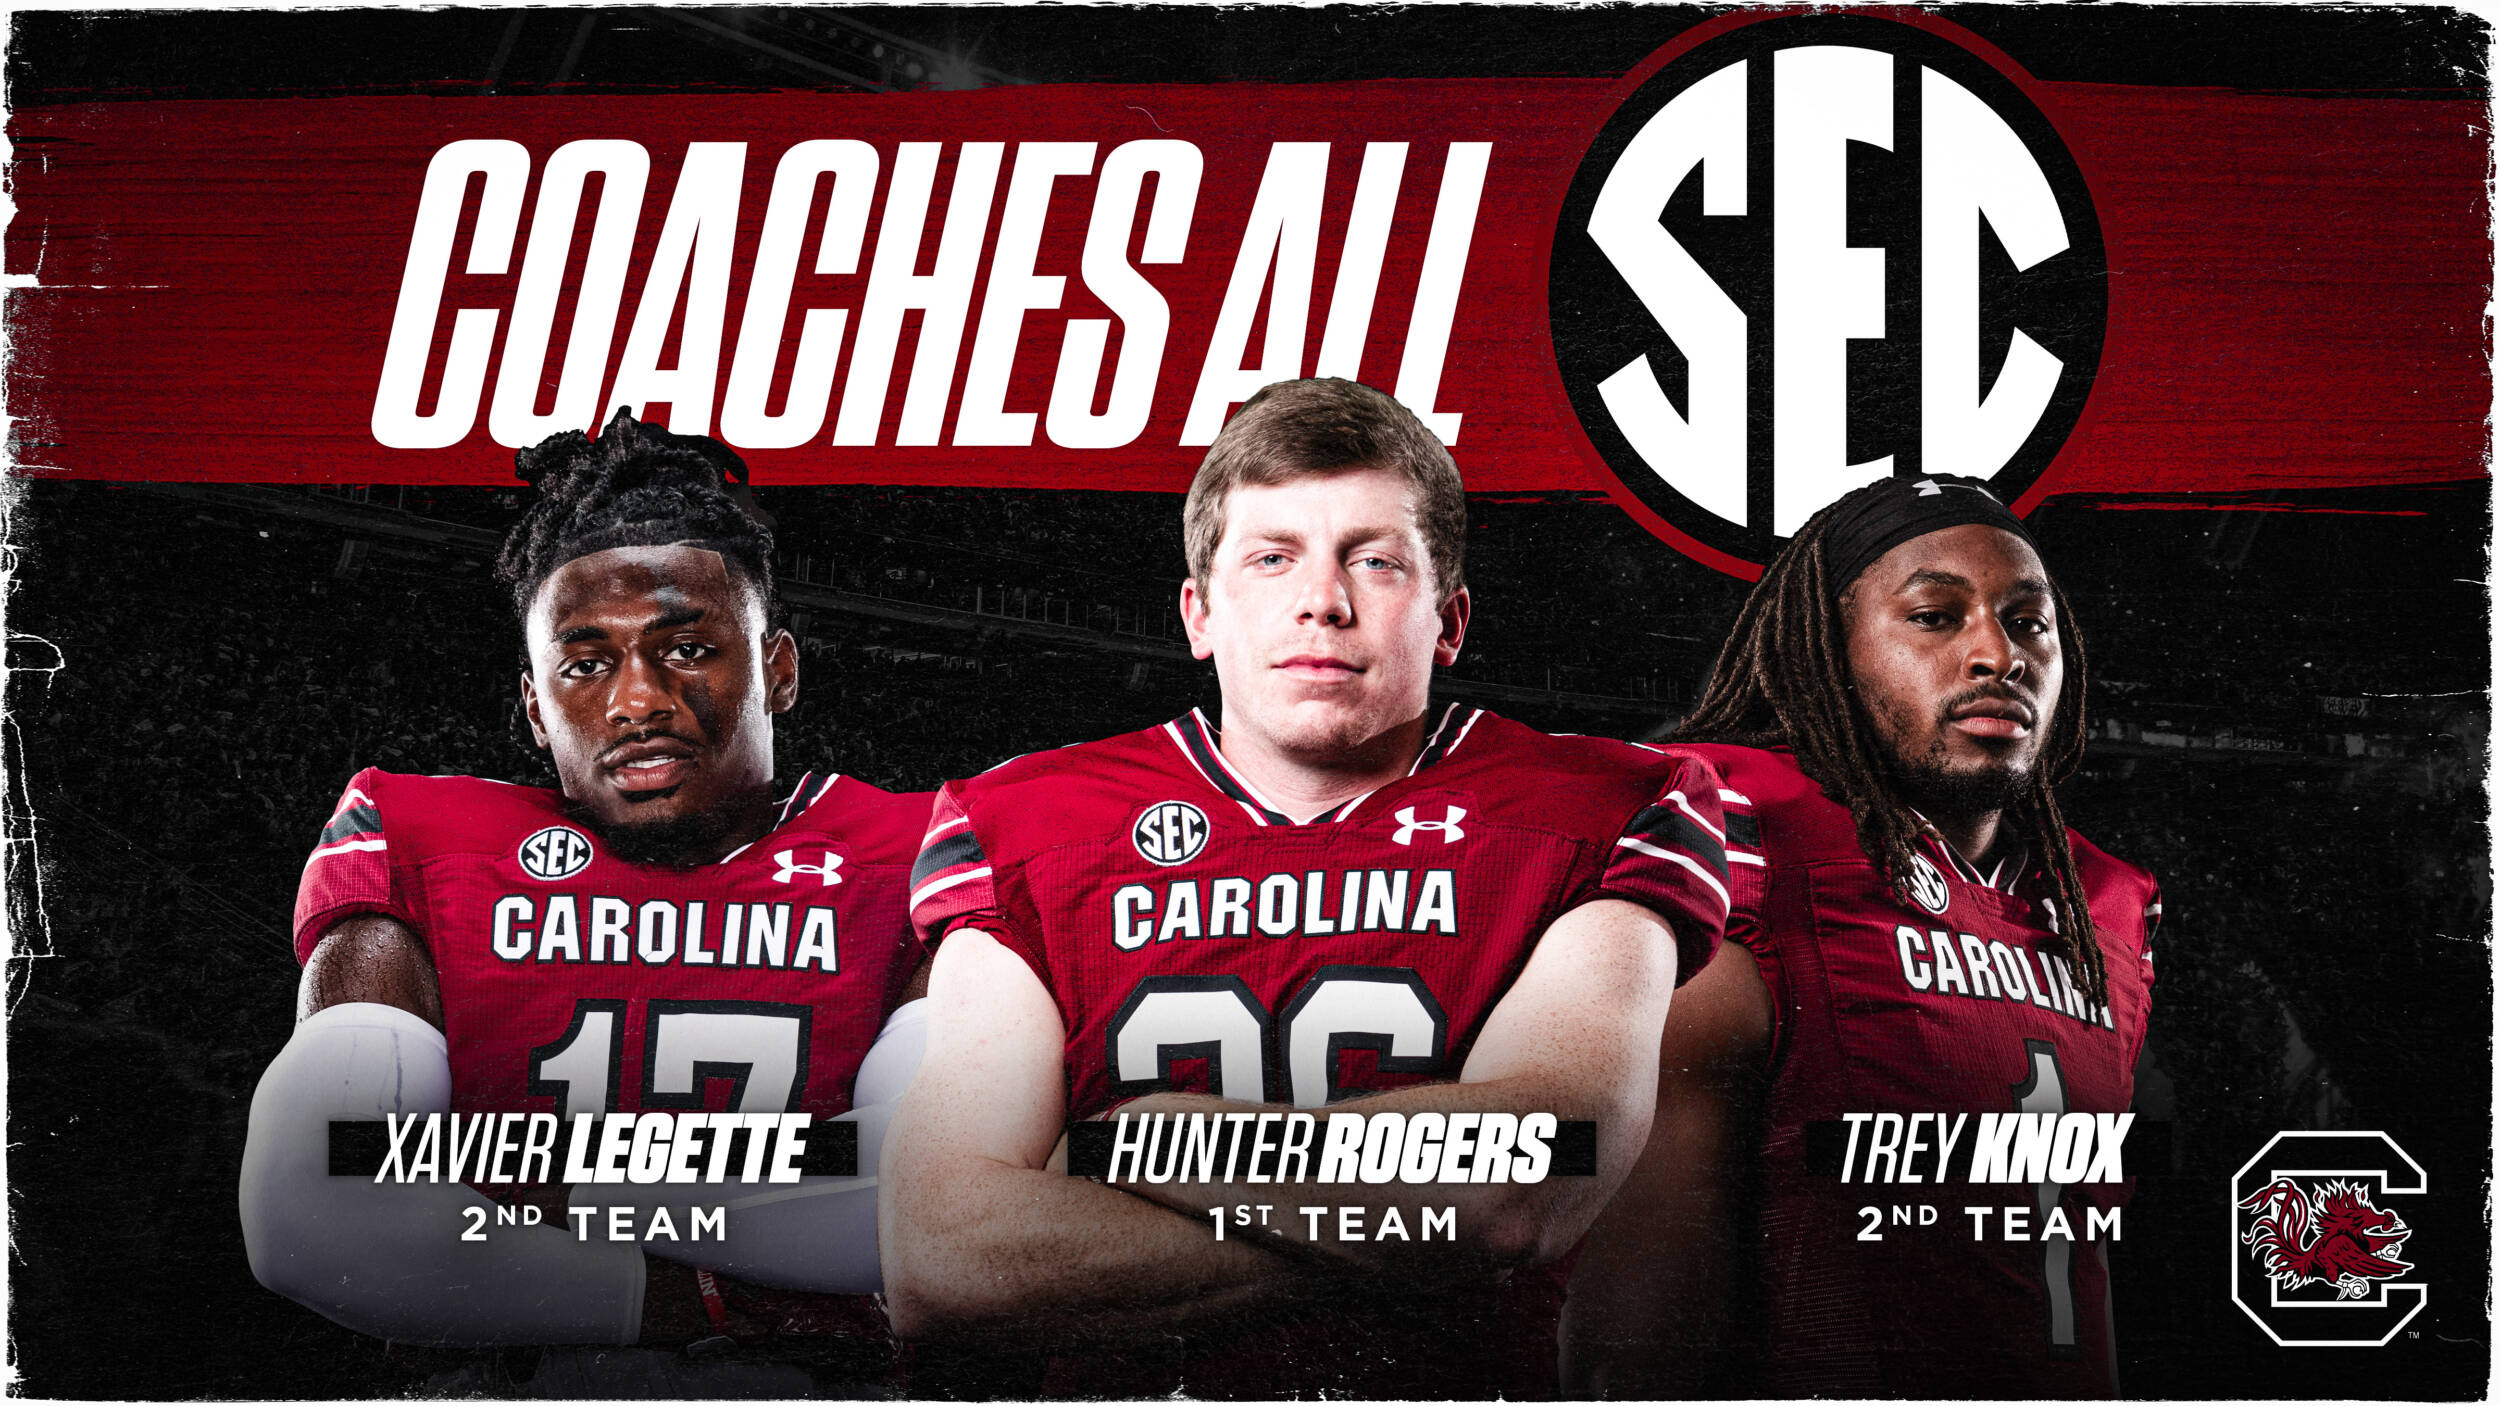 Three Gamecocks Named to Coaches All-SEC Teams